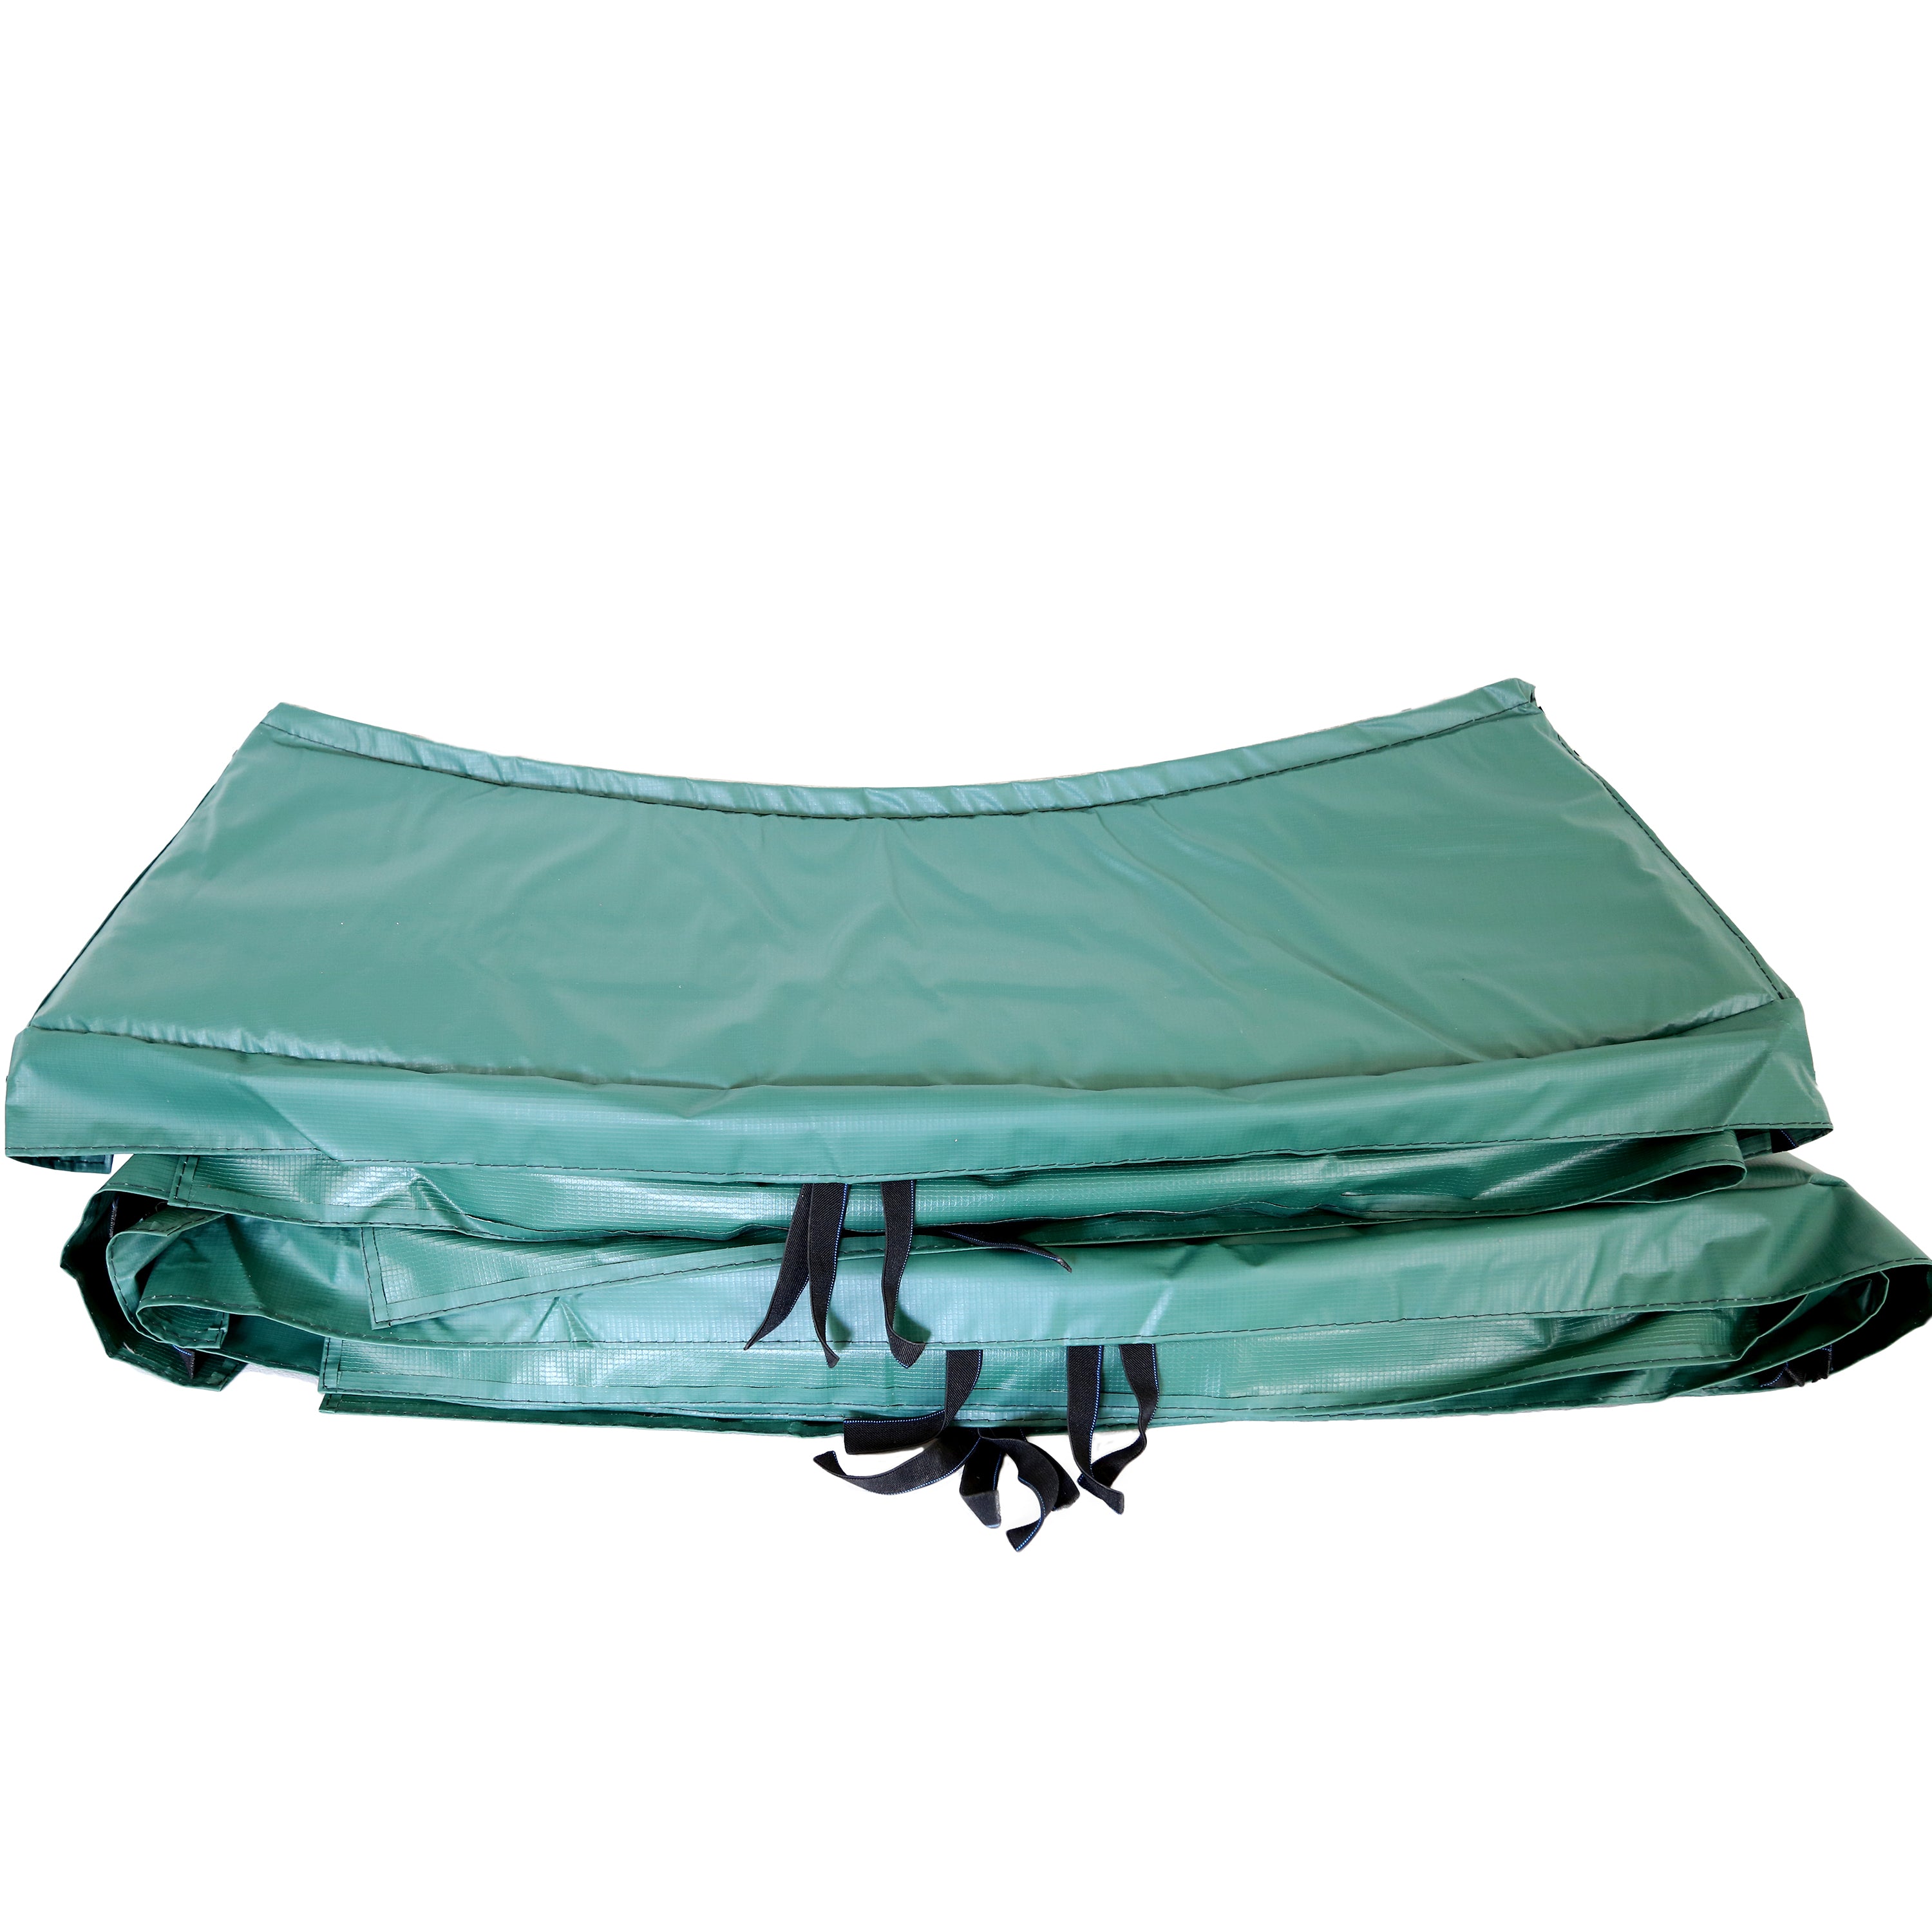 UV-resistant PVC spring pad to protect children as they climb on and off the trampoline. 